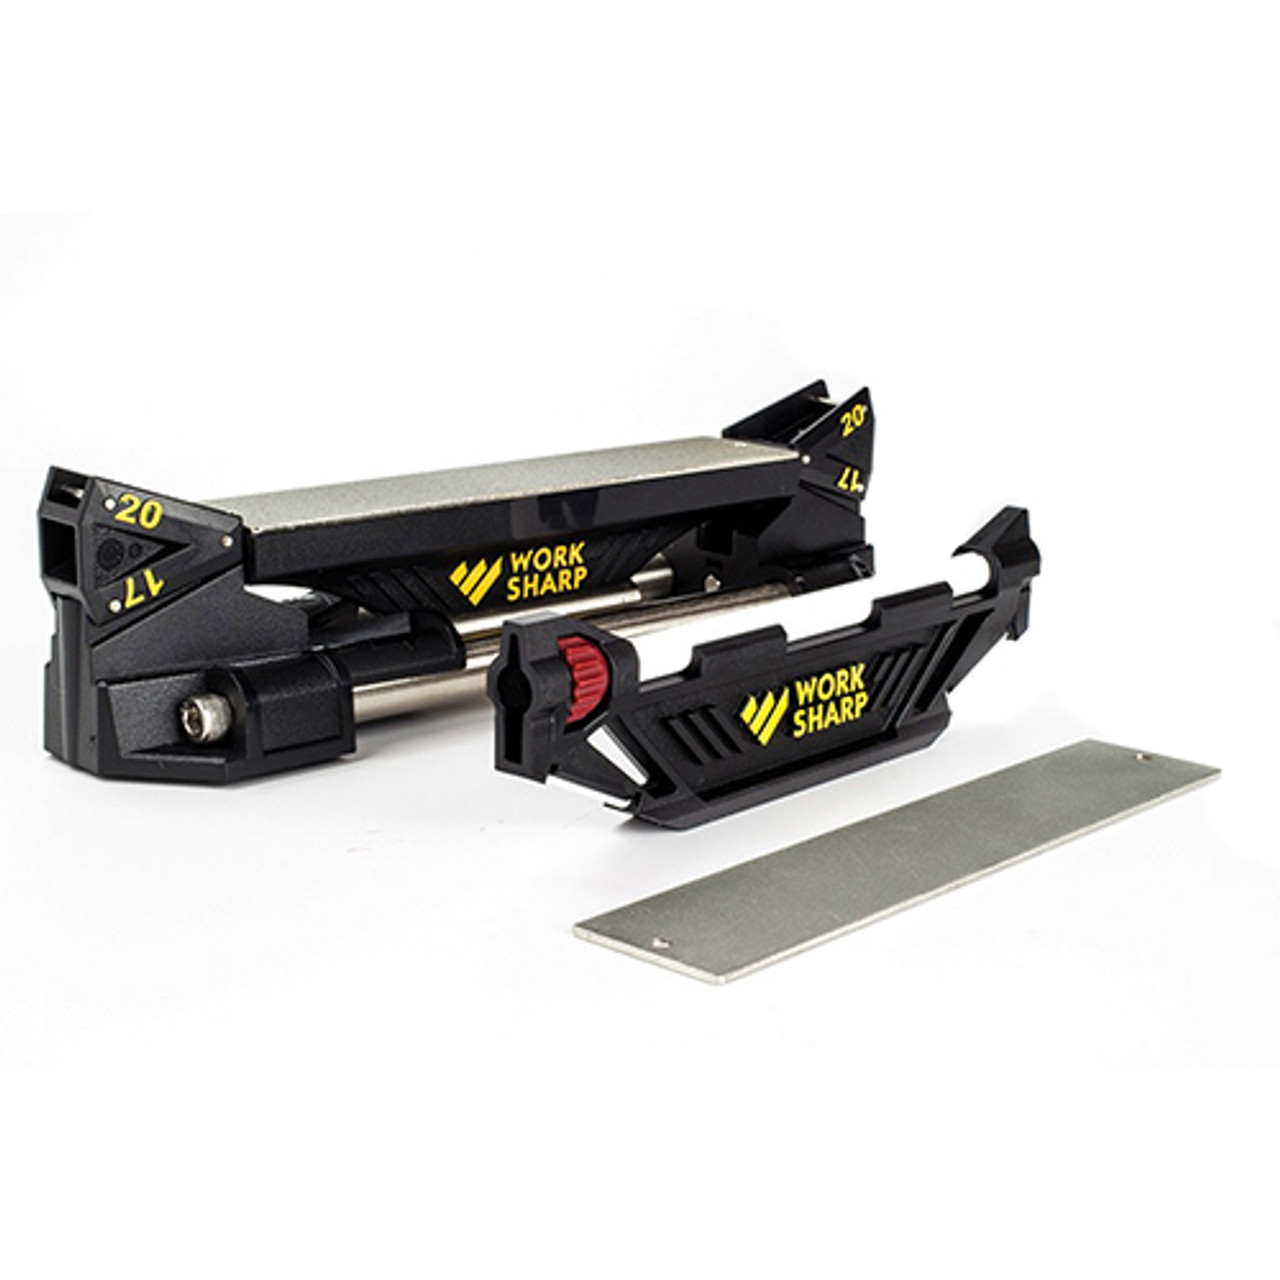 Work Sharp WSGSS Guided Sharpening System